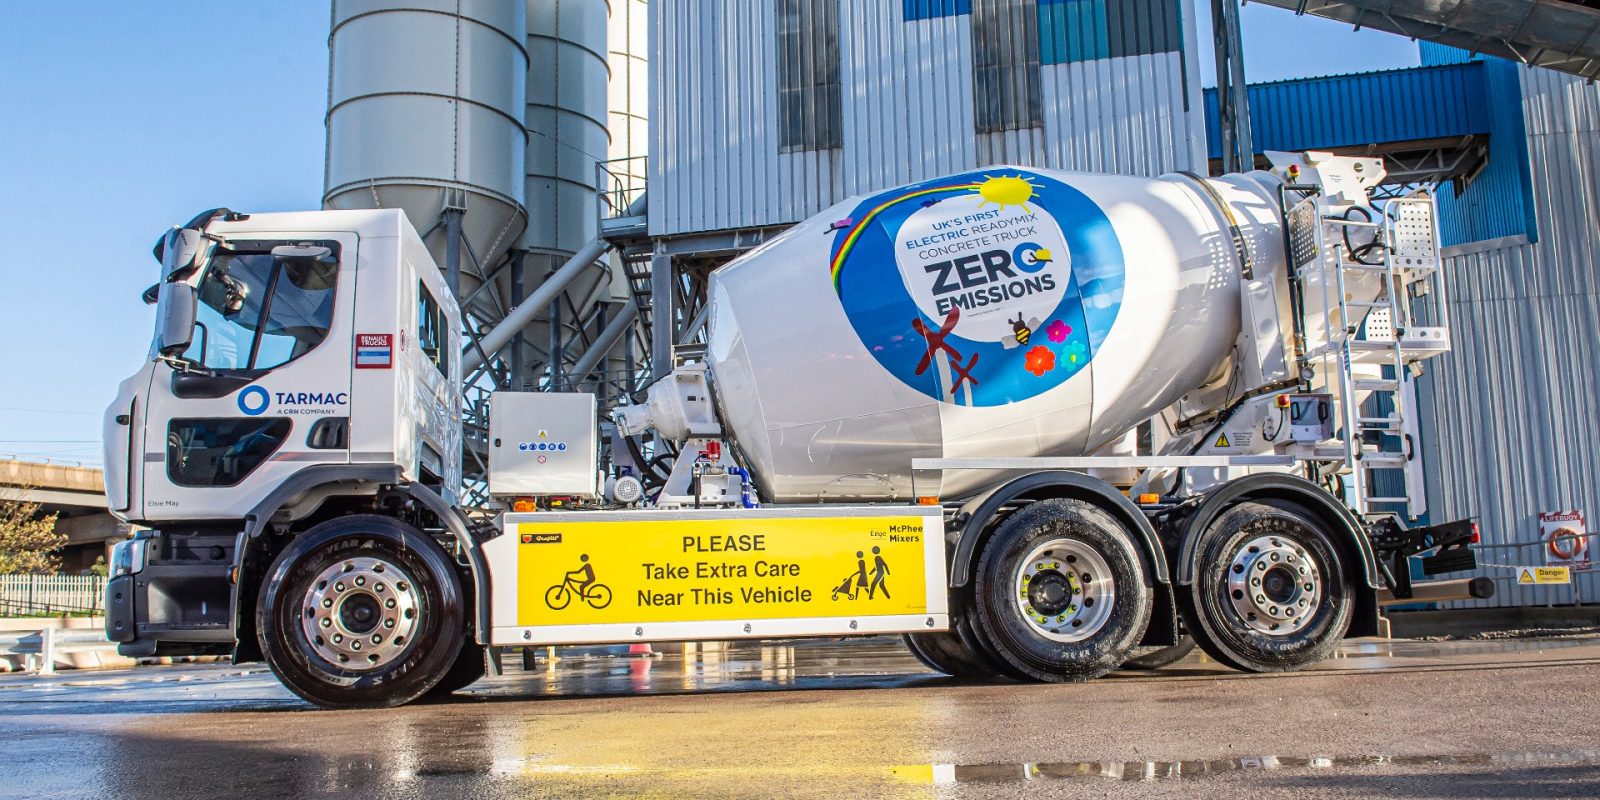 UK electric concrete The UK's first electric concrete mixer is officially ready to roll